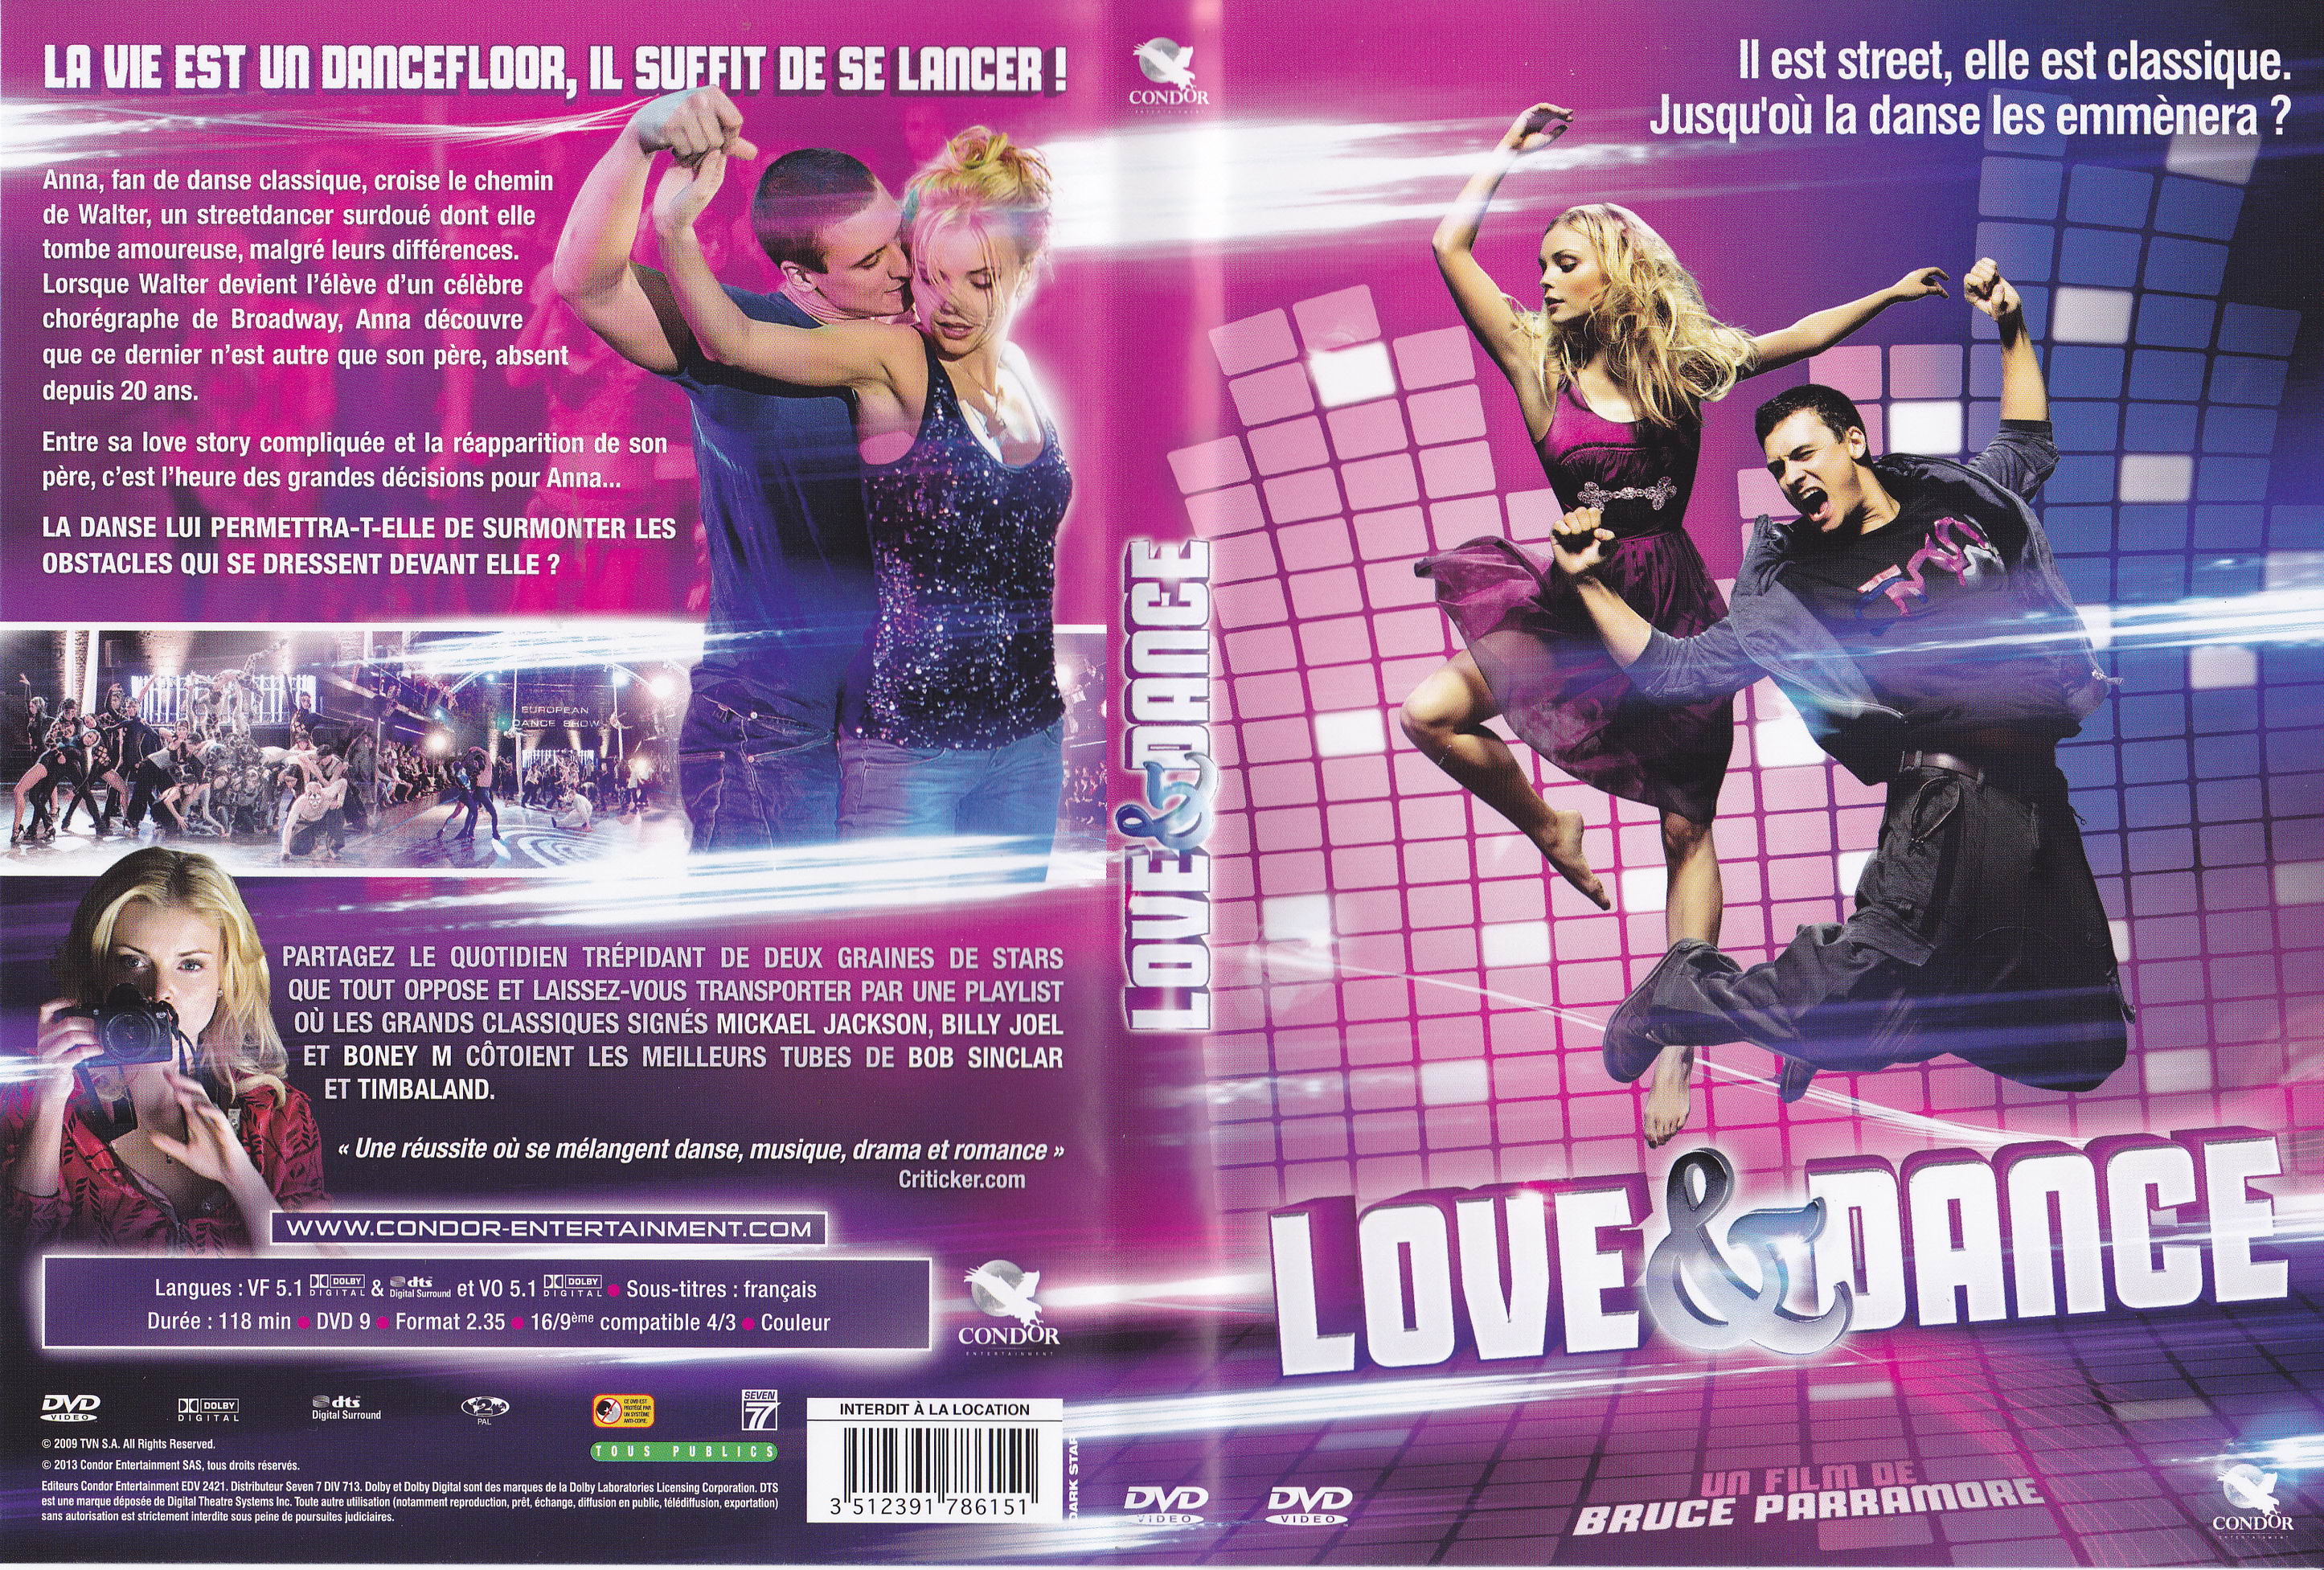 Jaquette DVD Love and Dance